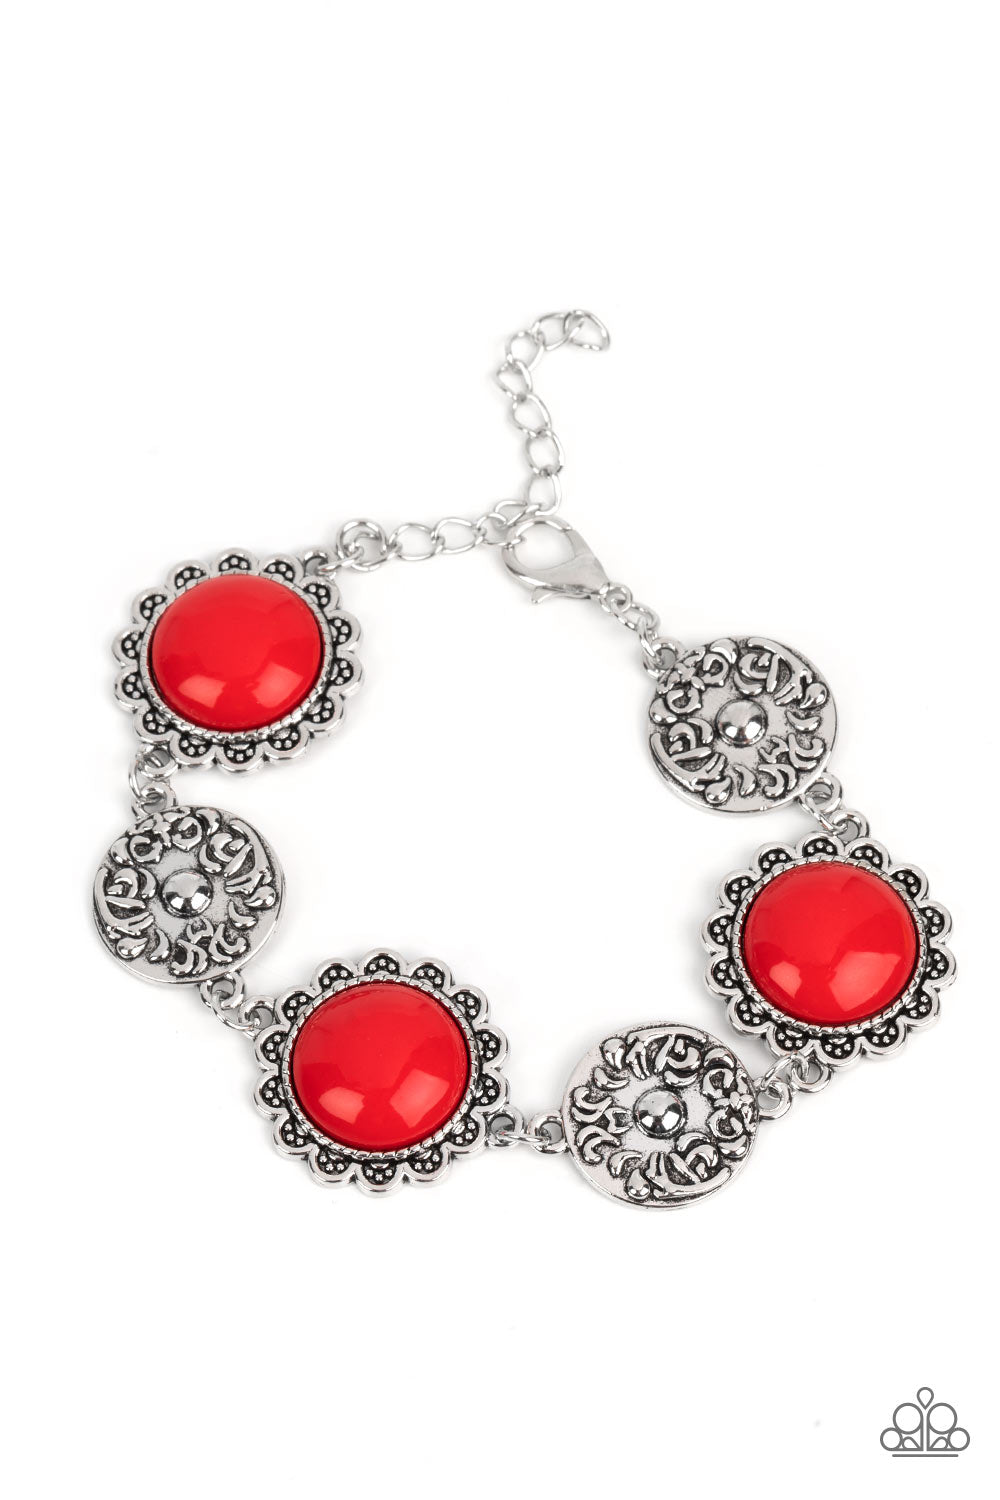 Positively Poppy - Red and Silver Bracelet - Paparazzi Accessories - Shiny oversized red beads are wrapped in floral-inspired frames of silver, filled with studded texture. Silver discs embossed in a filigree motif alternate with the vibrant beads as they link around the wrist in a whimsical finish. Features an adjustable clasp closure.